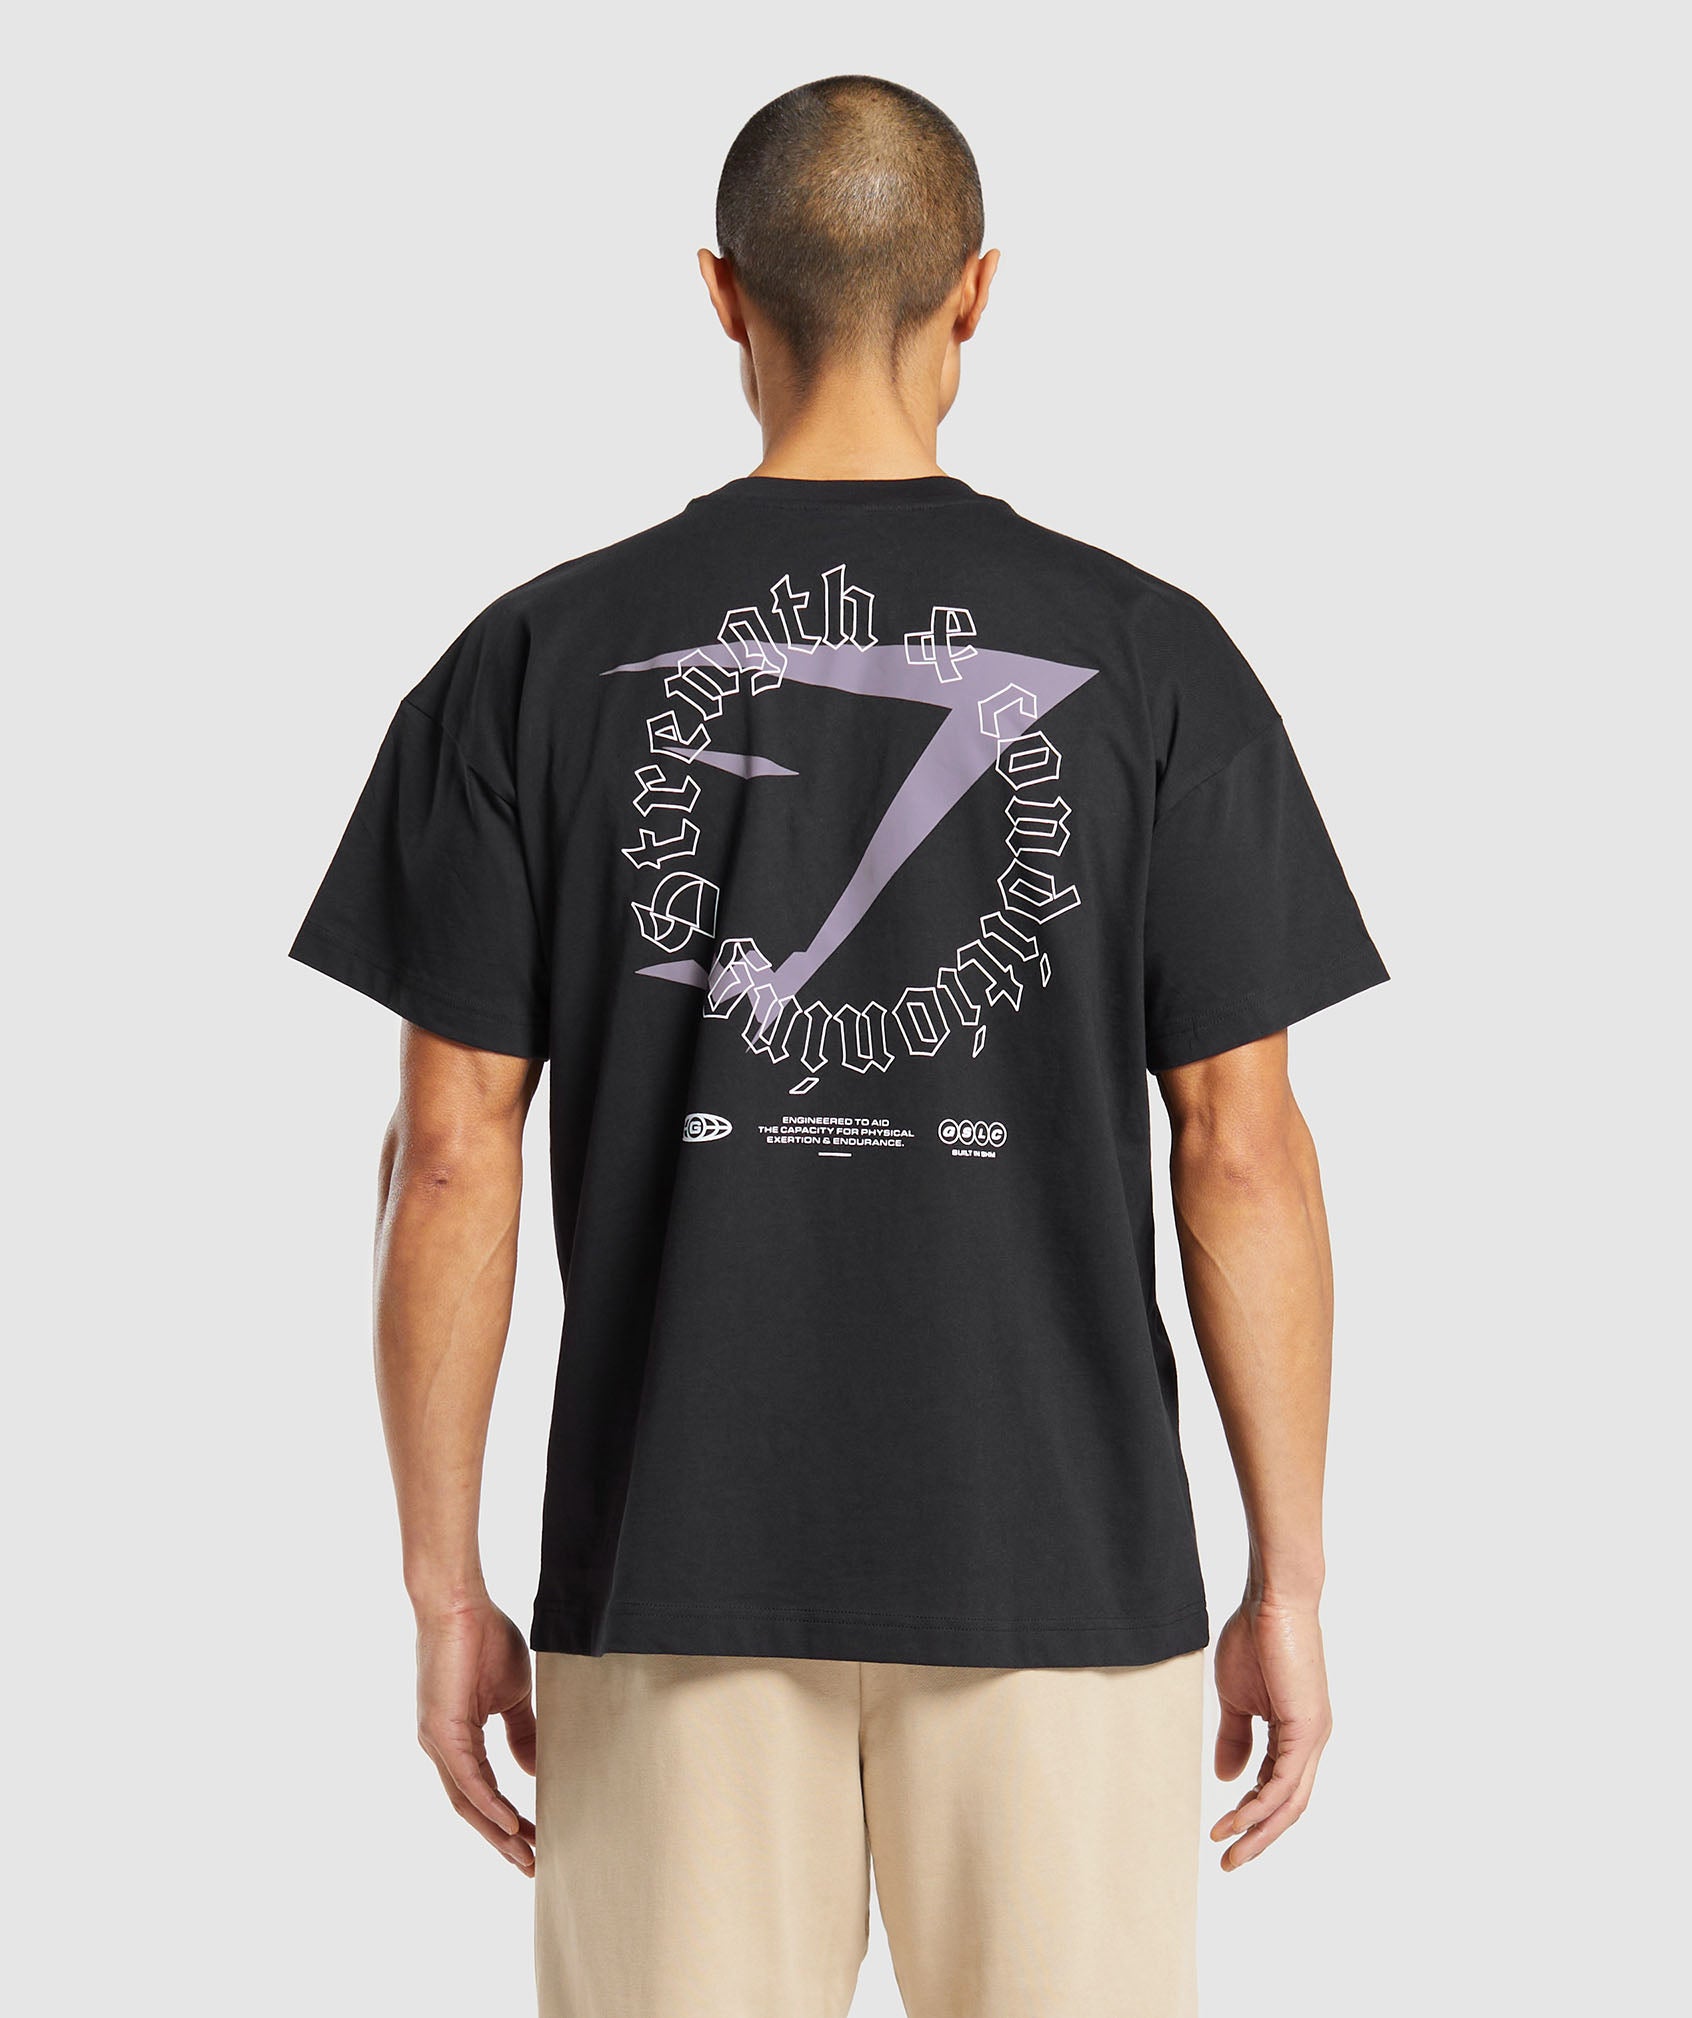 Strength and Conditioning T-Shirt in Black - view 1